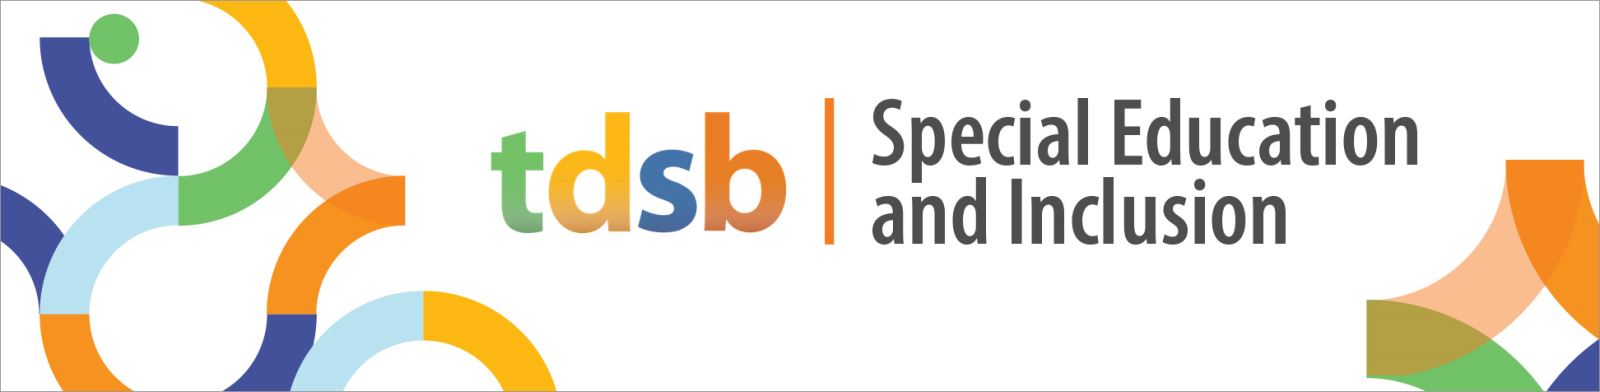 Banner for special education and inclusion information